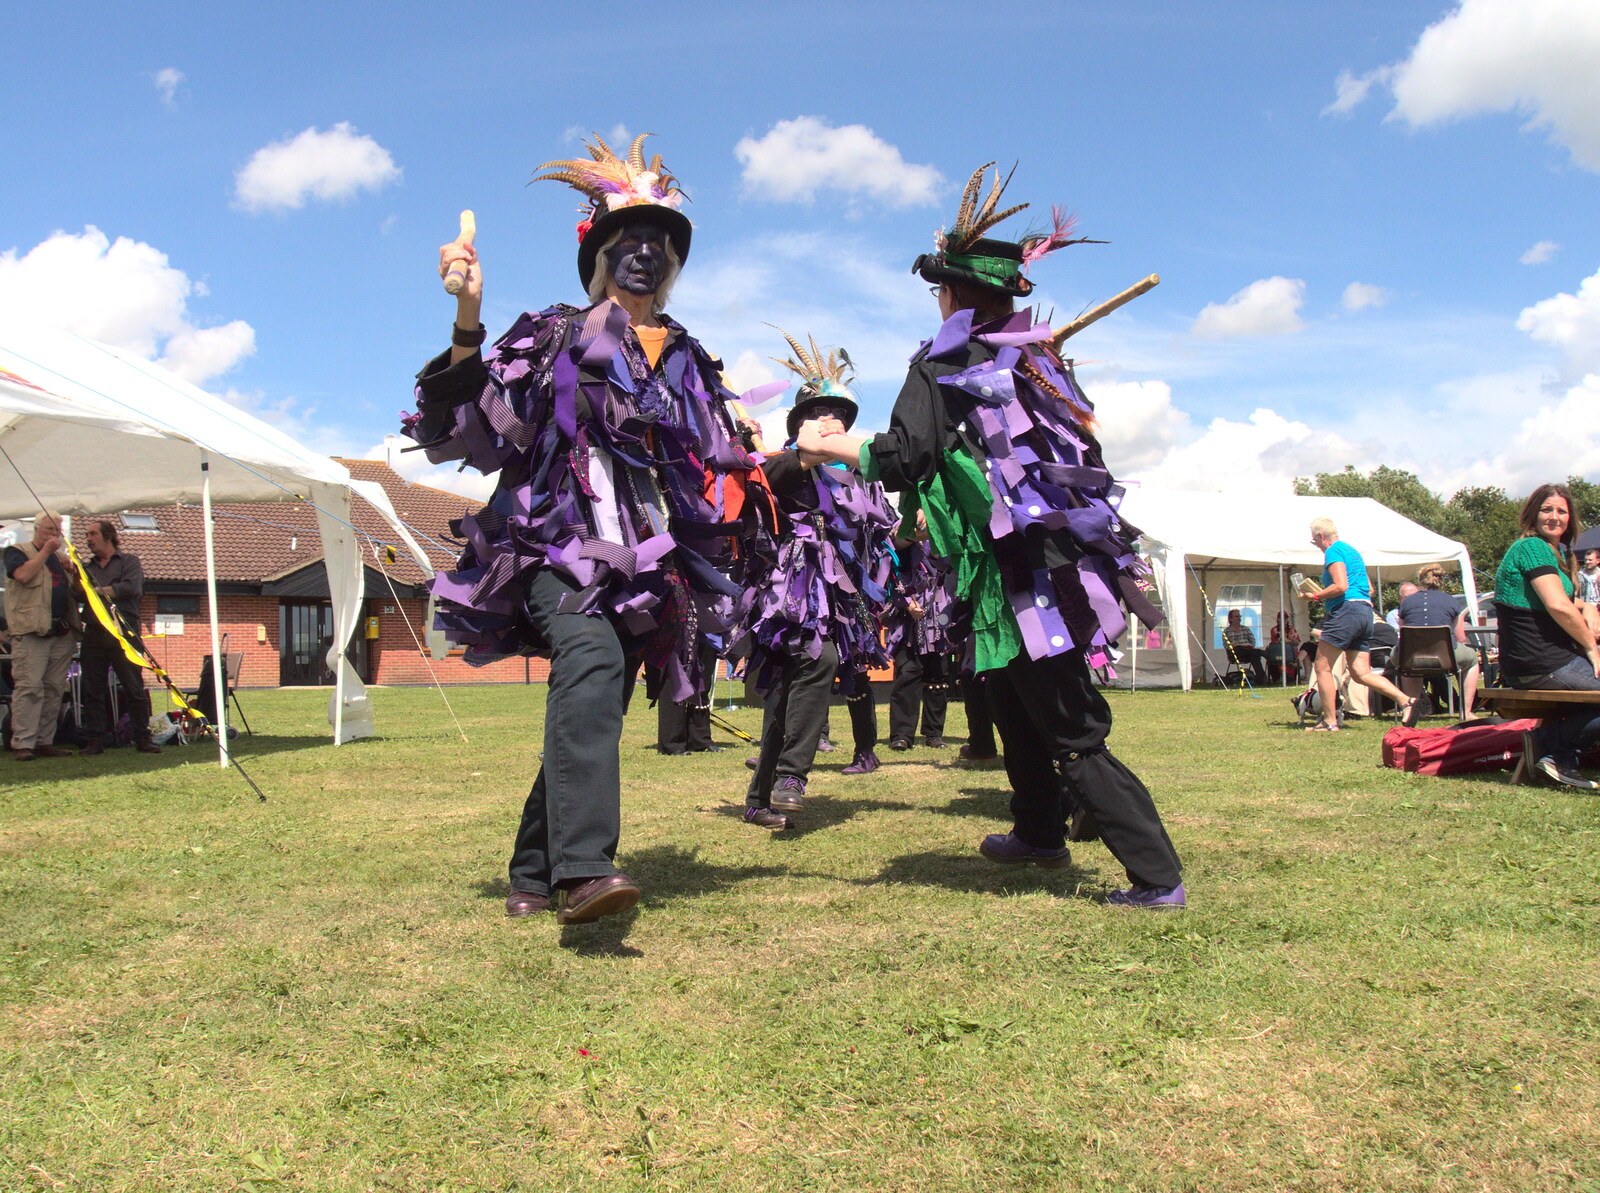 There's more dancing from The Humpty Dumpty Beer Festival, Reedham, Norfolk - 22nd July 2017